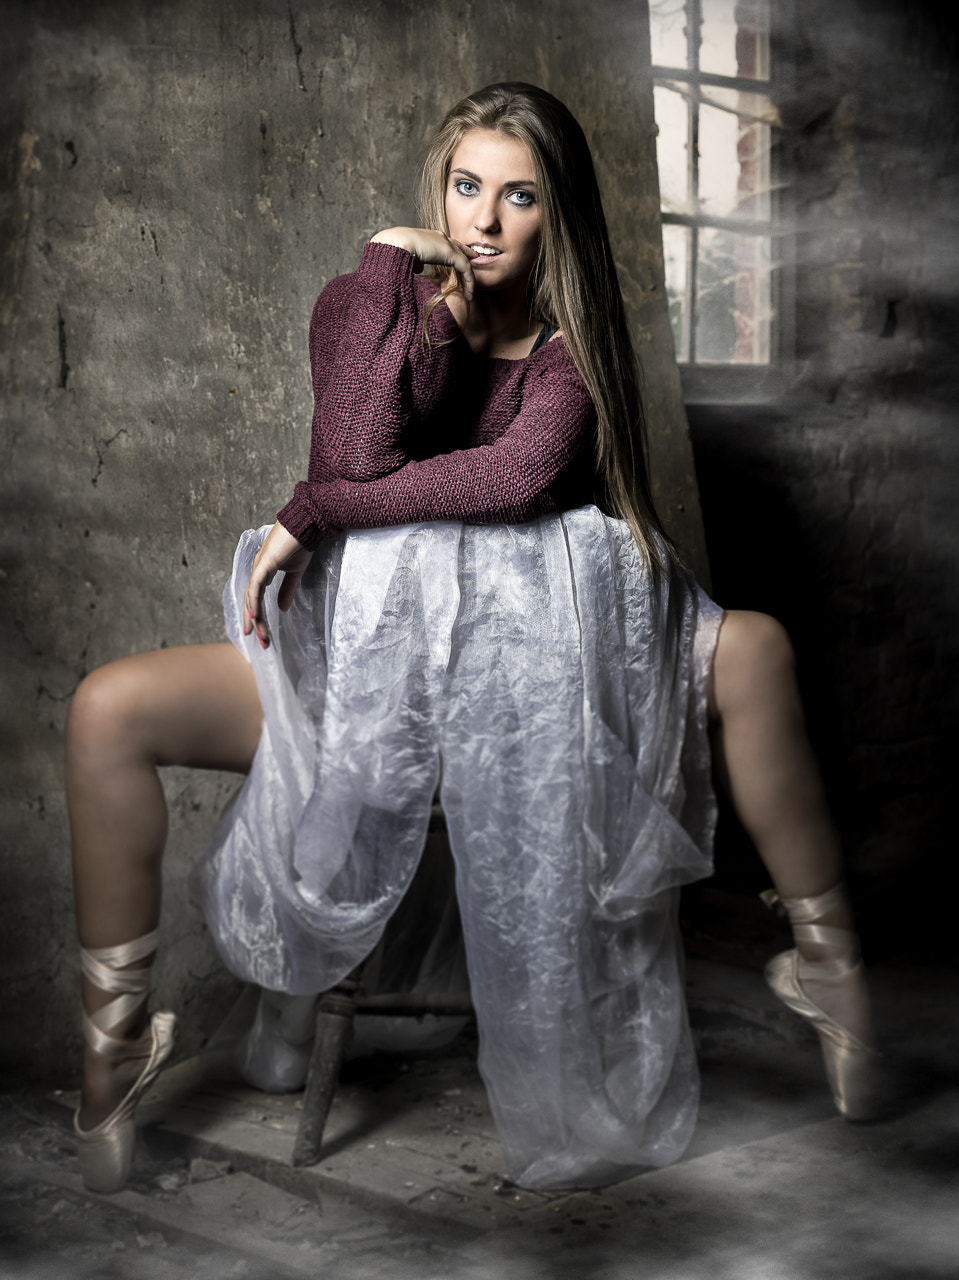 Phase One IQ140 sample photo. The girl on the attic photography